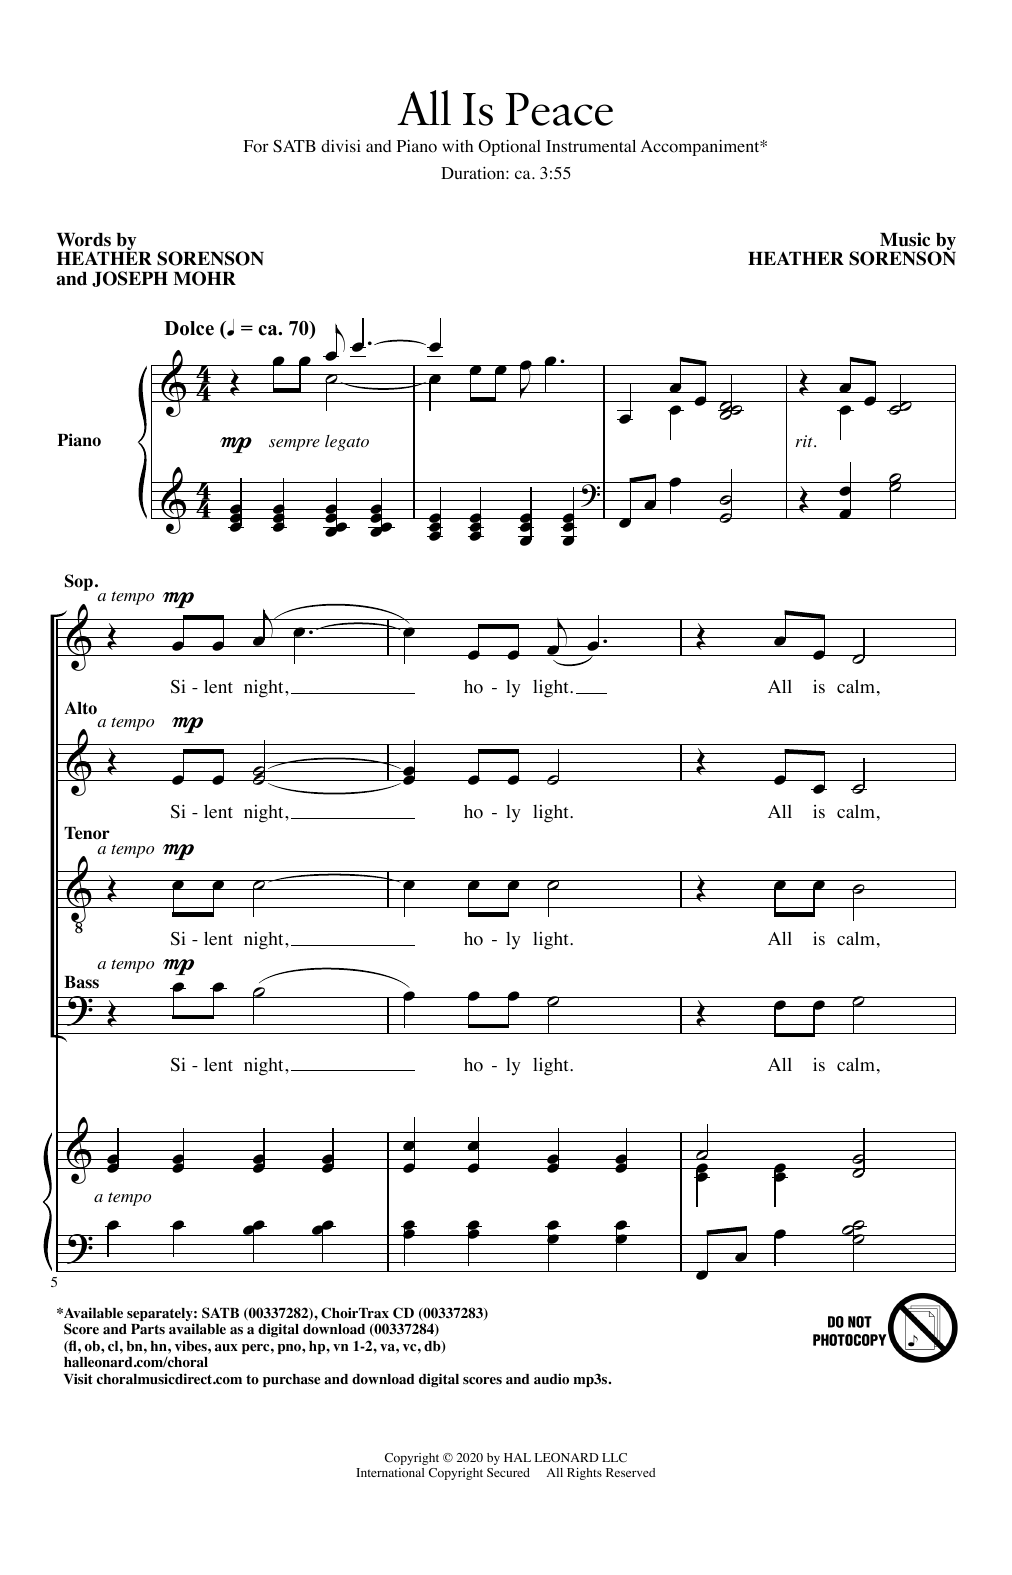 Download Heather Sorenson and Joseph Mohr All Is Peace Sheet Music